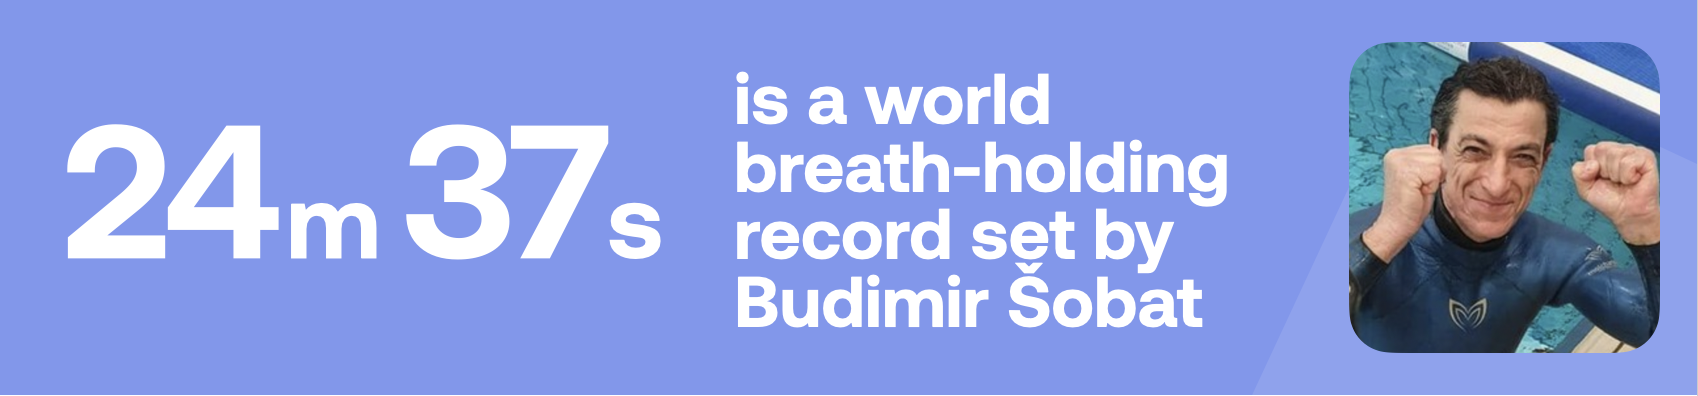 24m 37s is a world breath-holding record set by Budimir Sobat